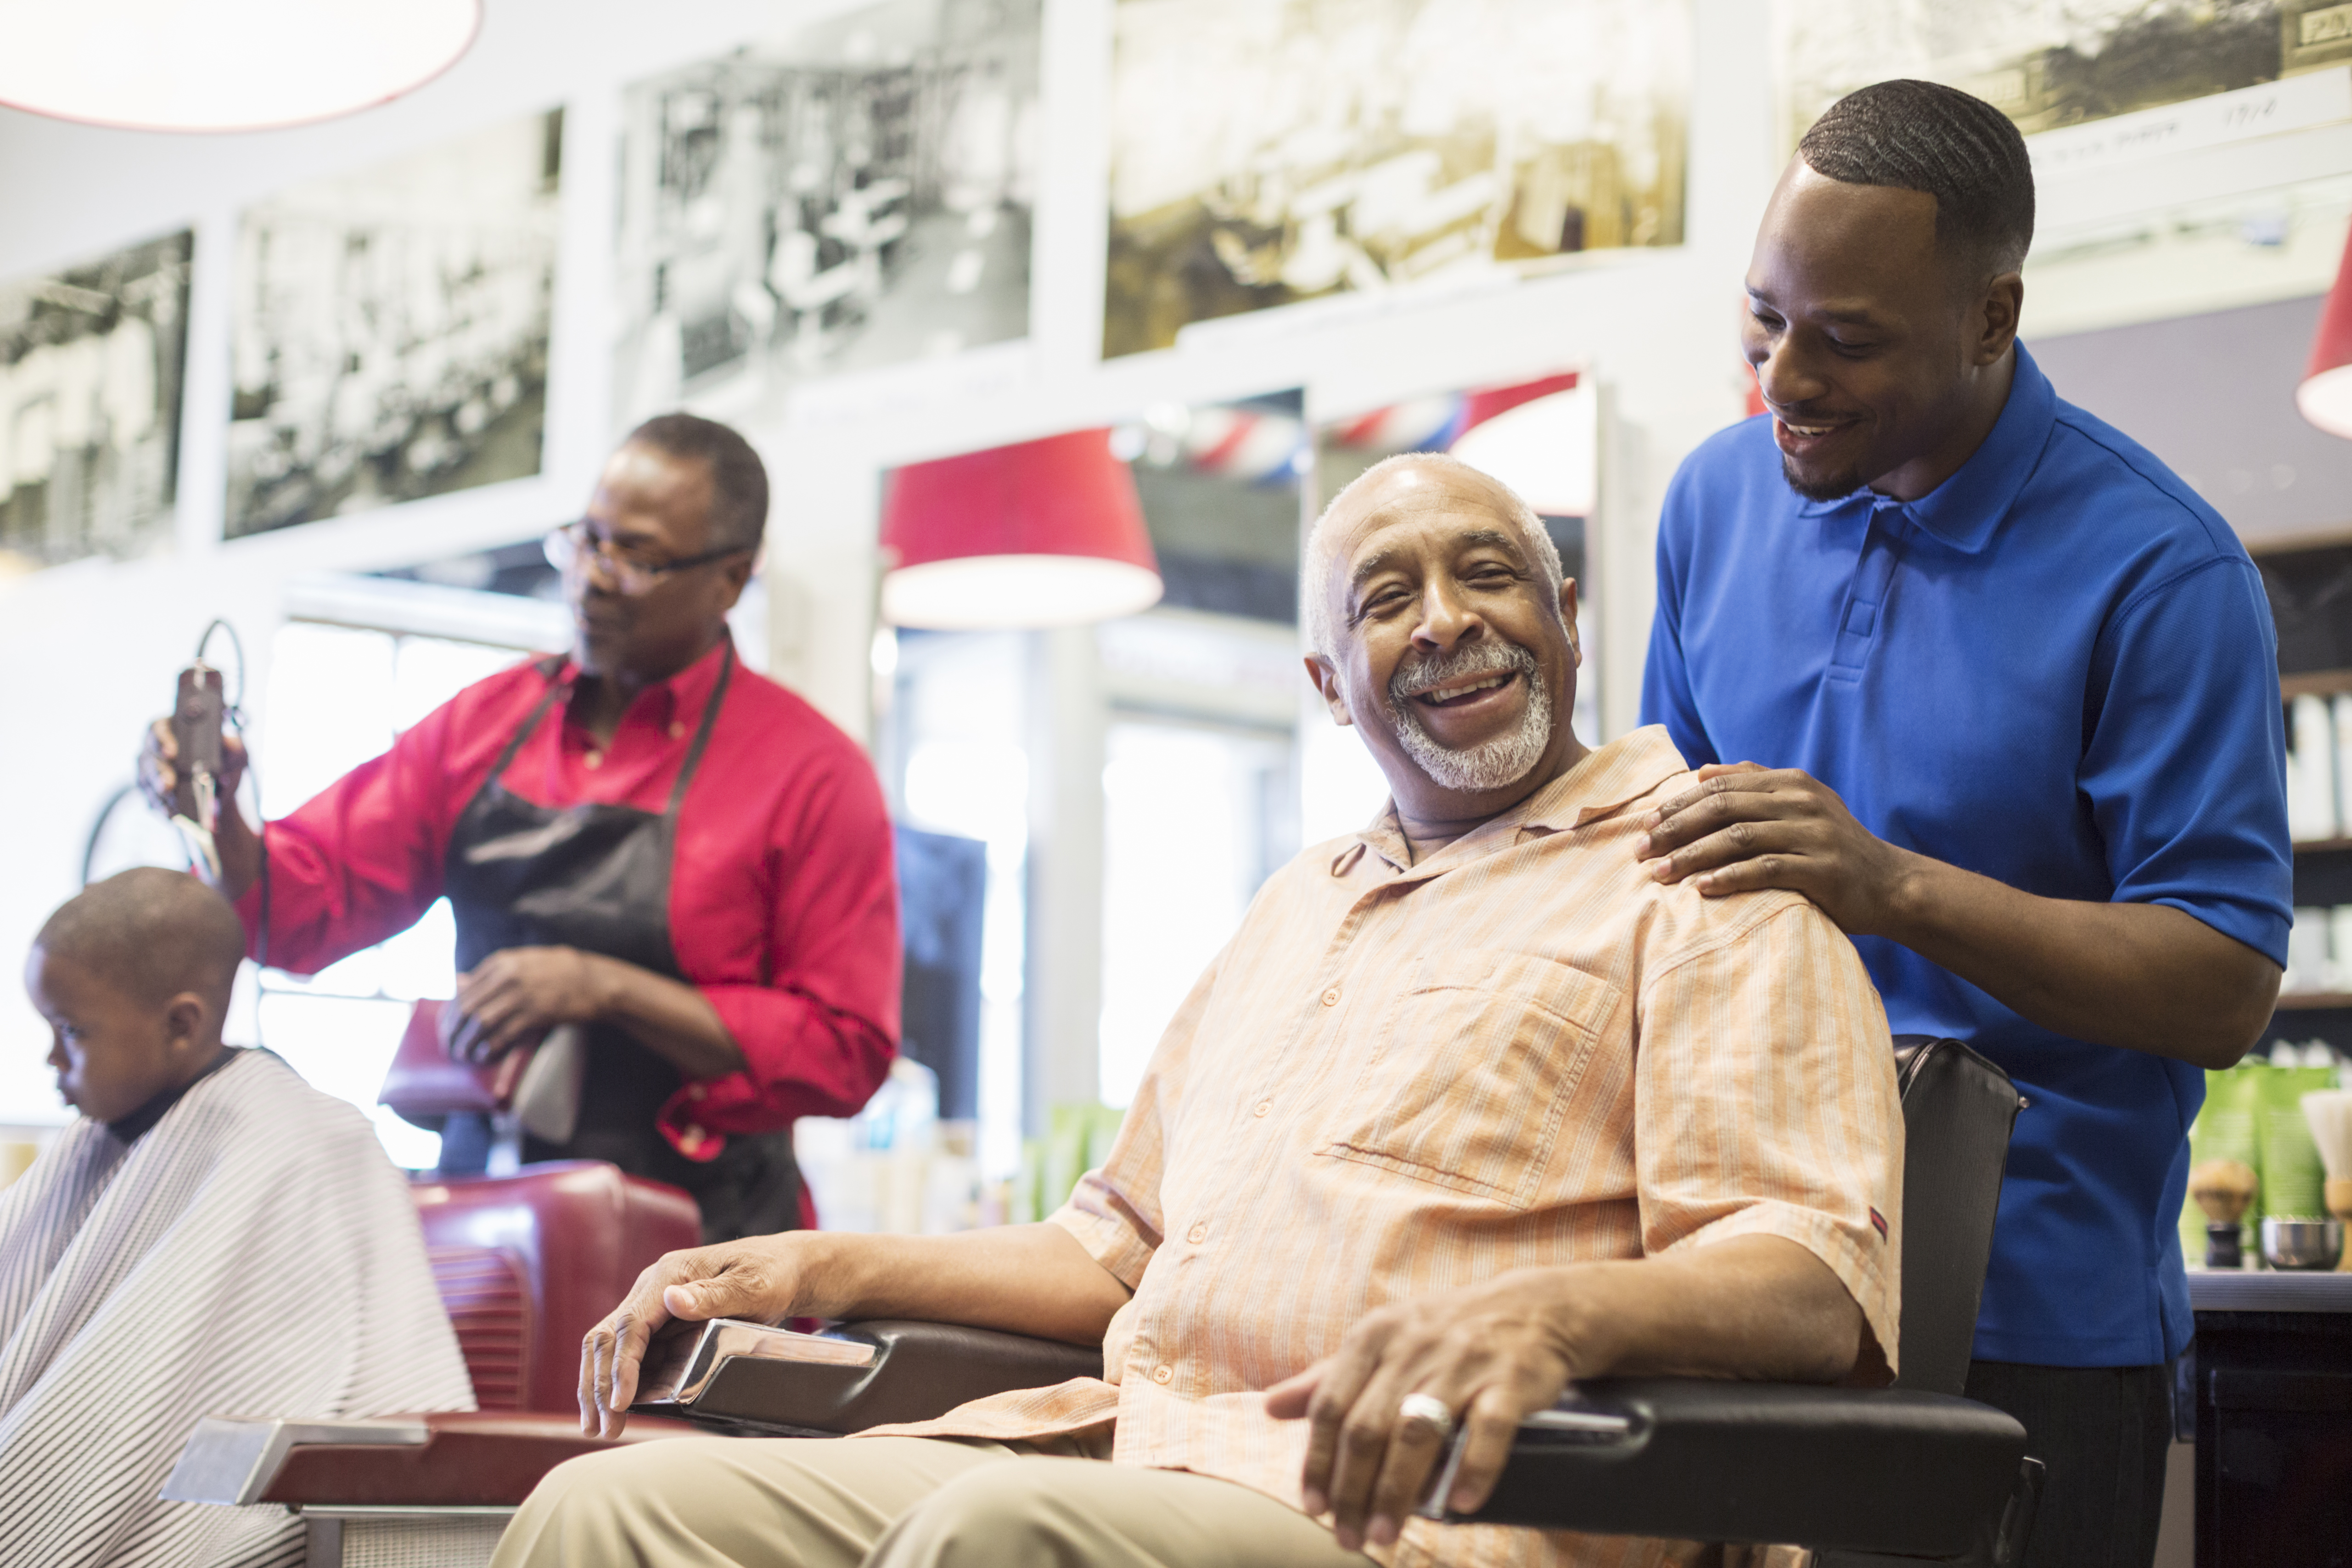 Black Males of all ages in Barbershop